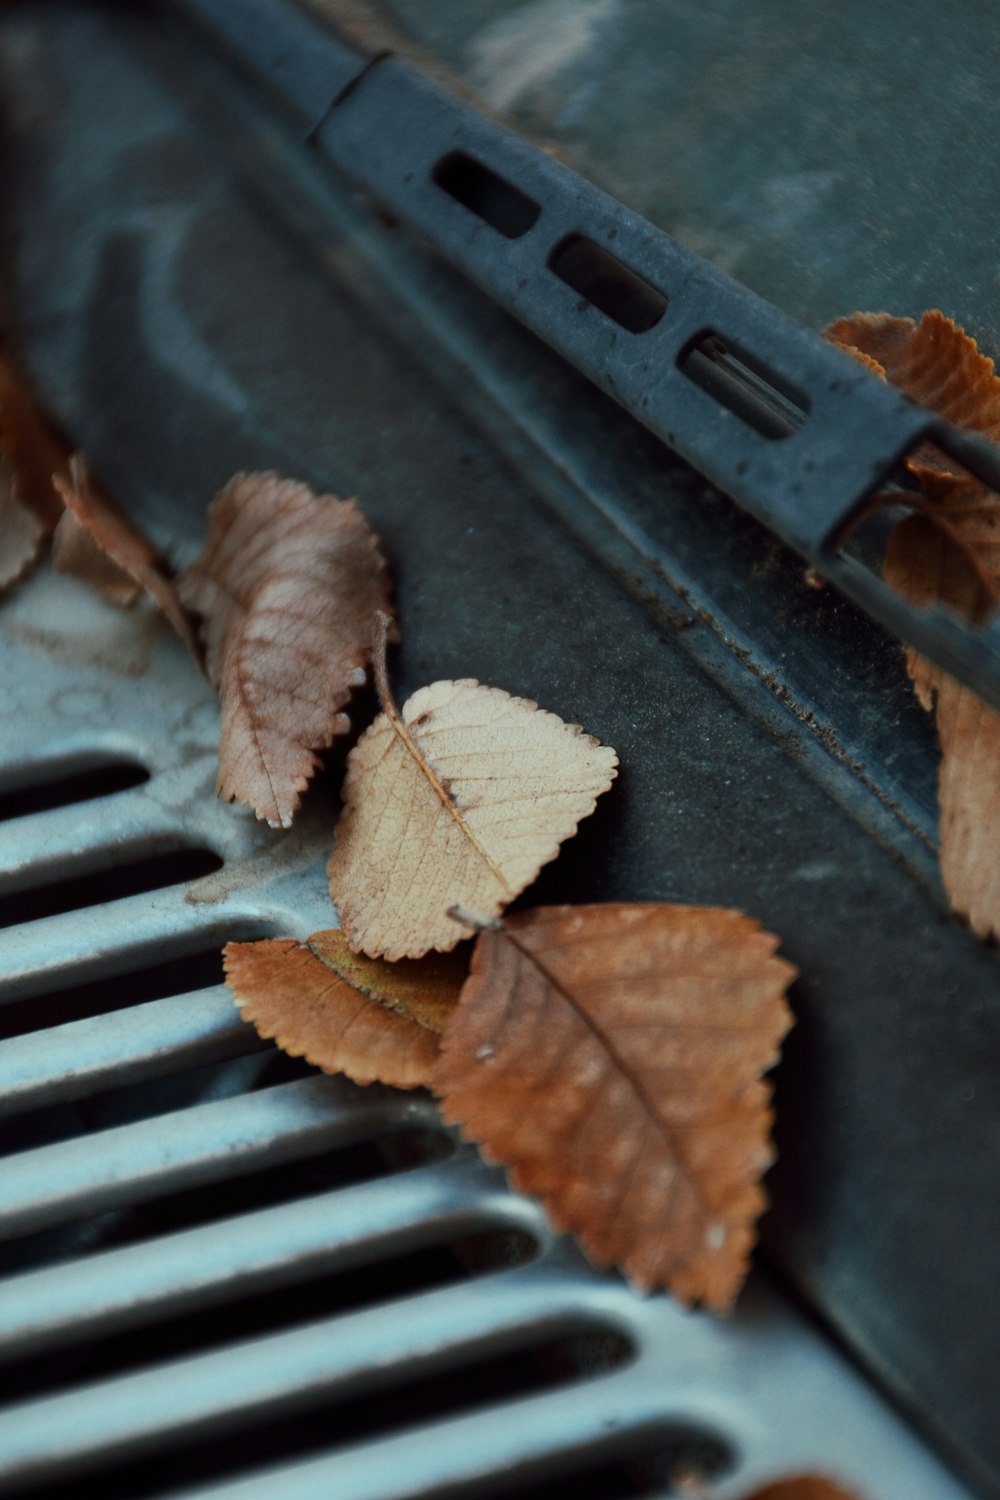 a close up of leaves on the grill of a car